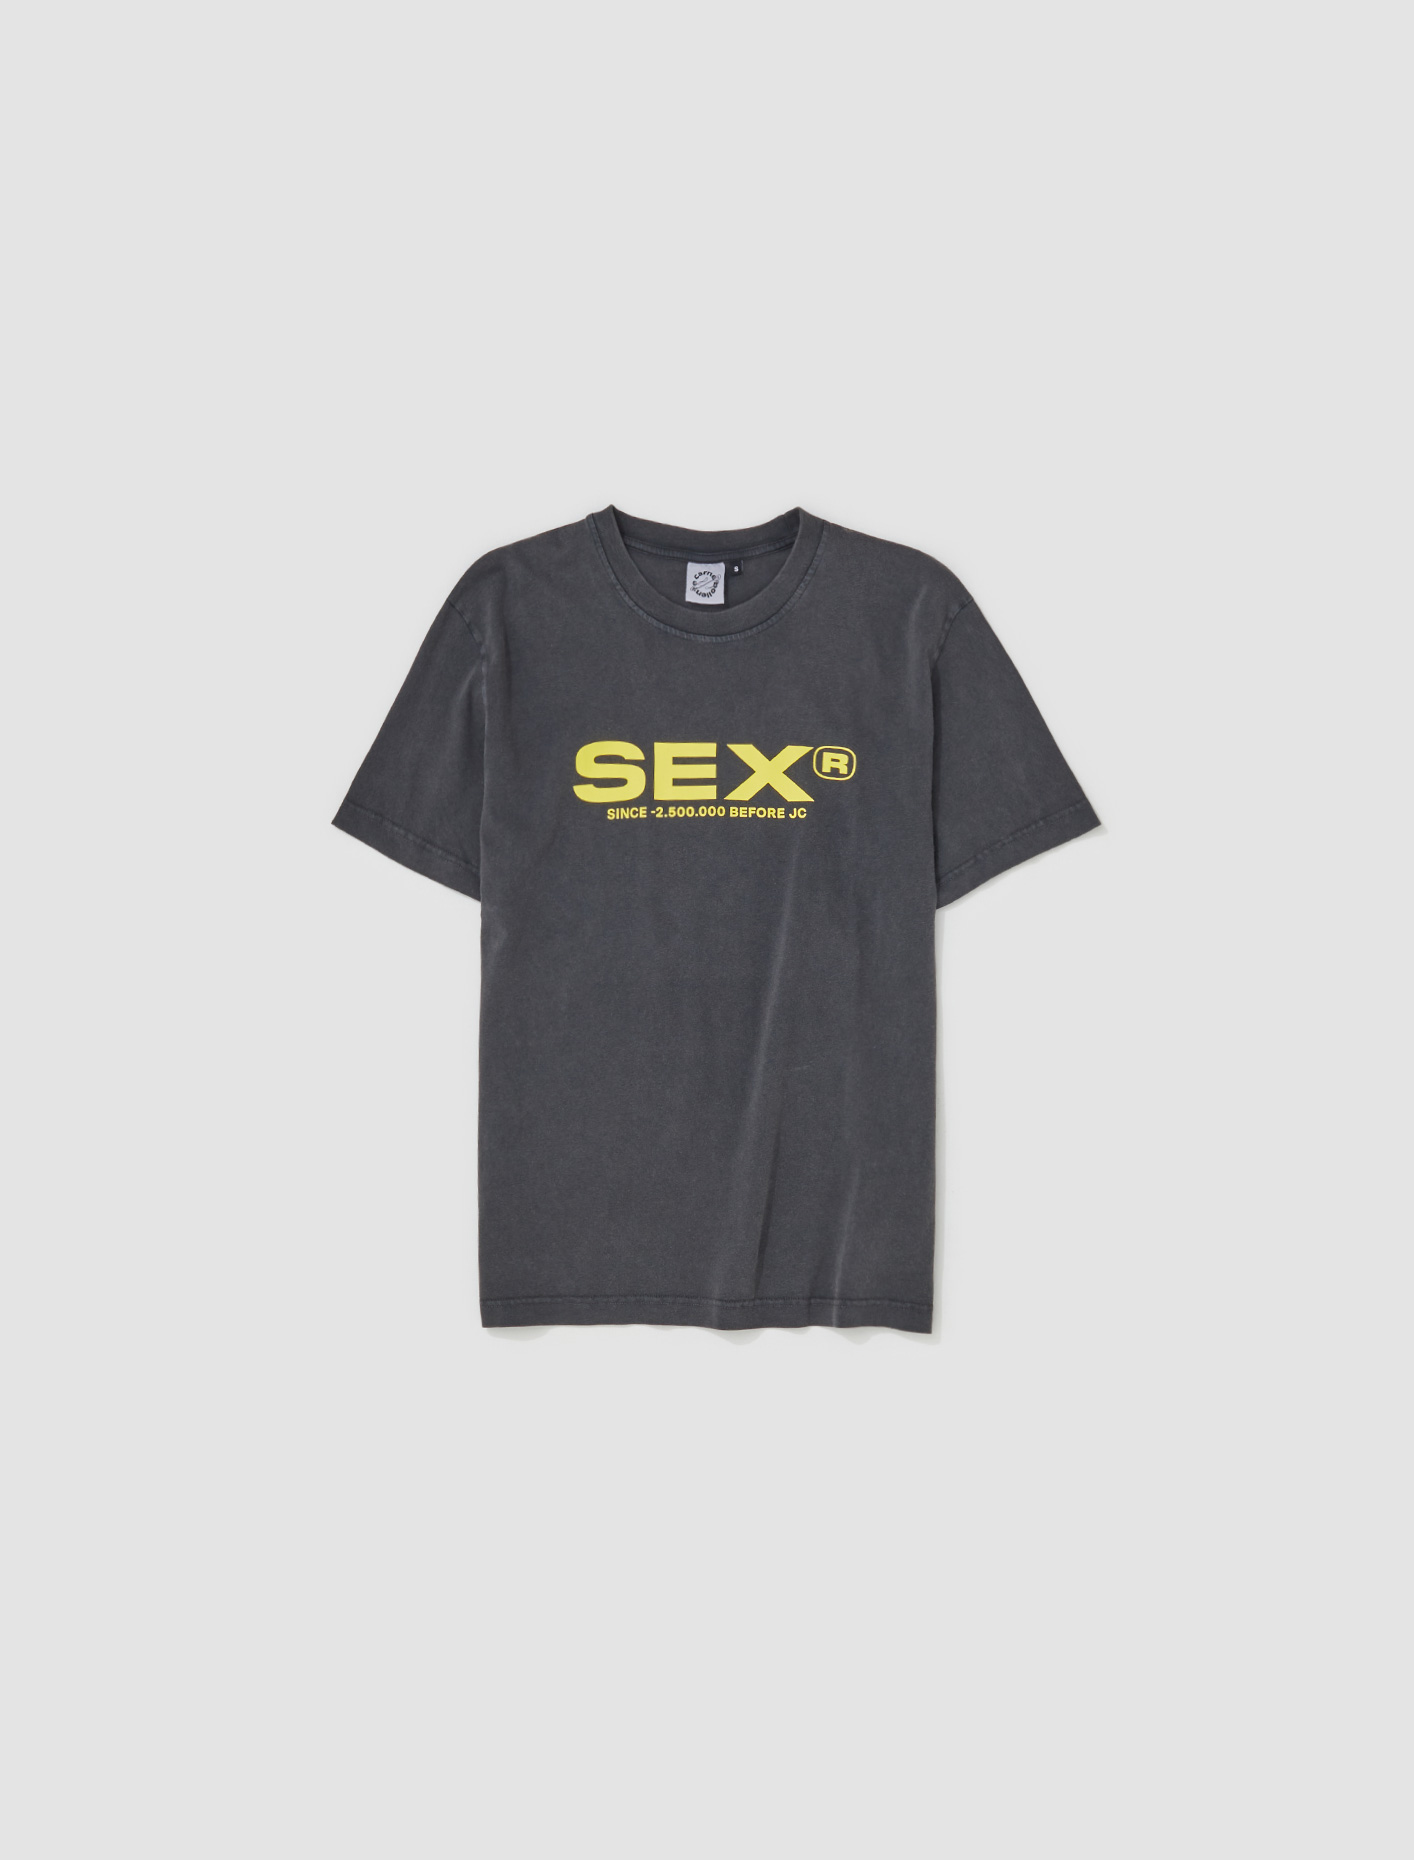 Sex'' T-Shirt in Washed Black